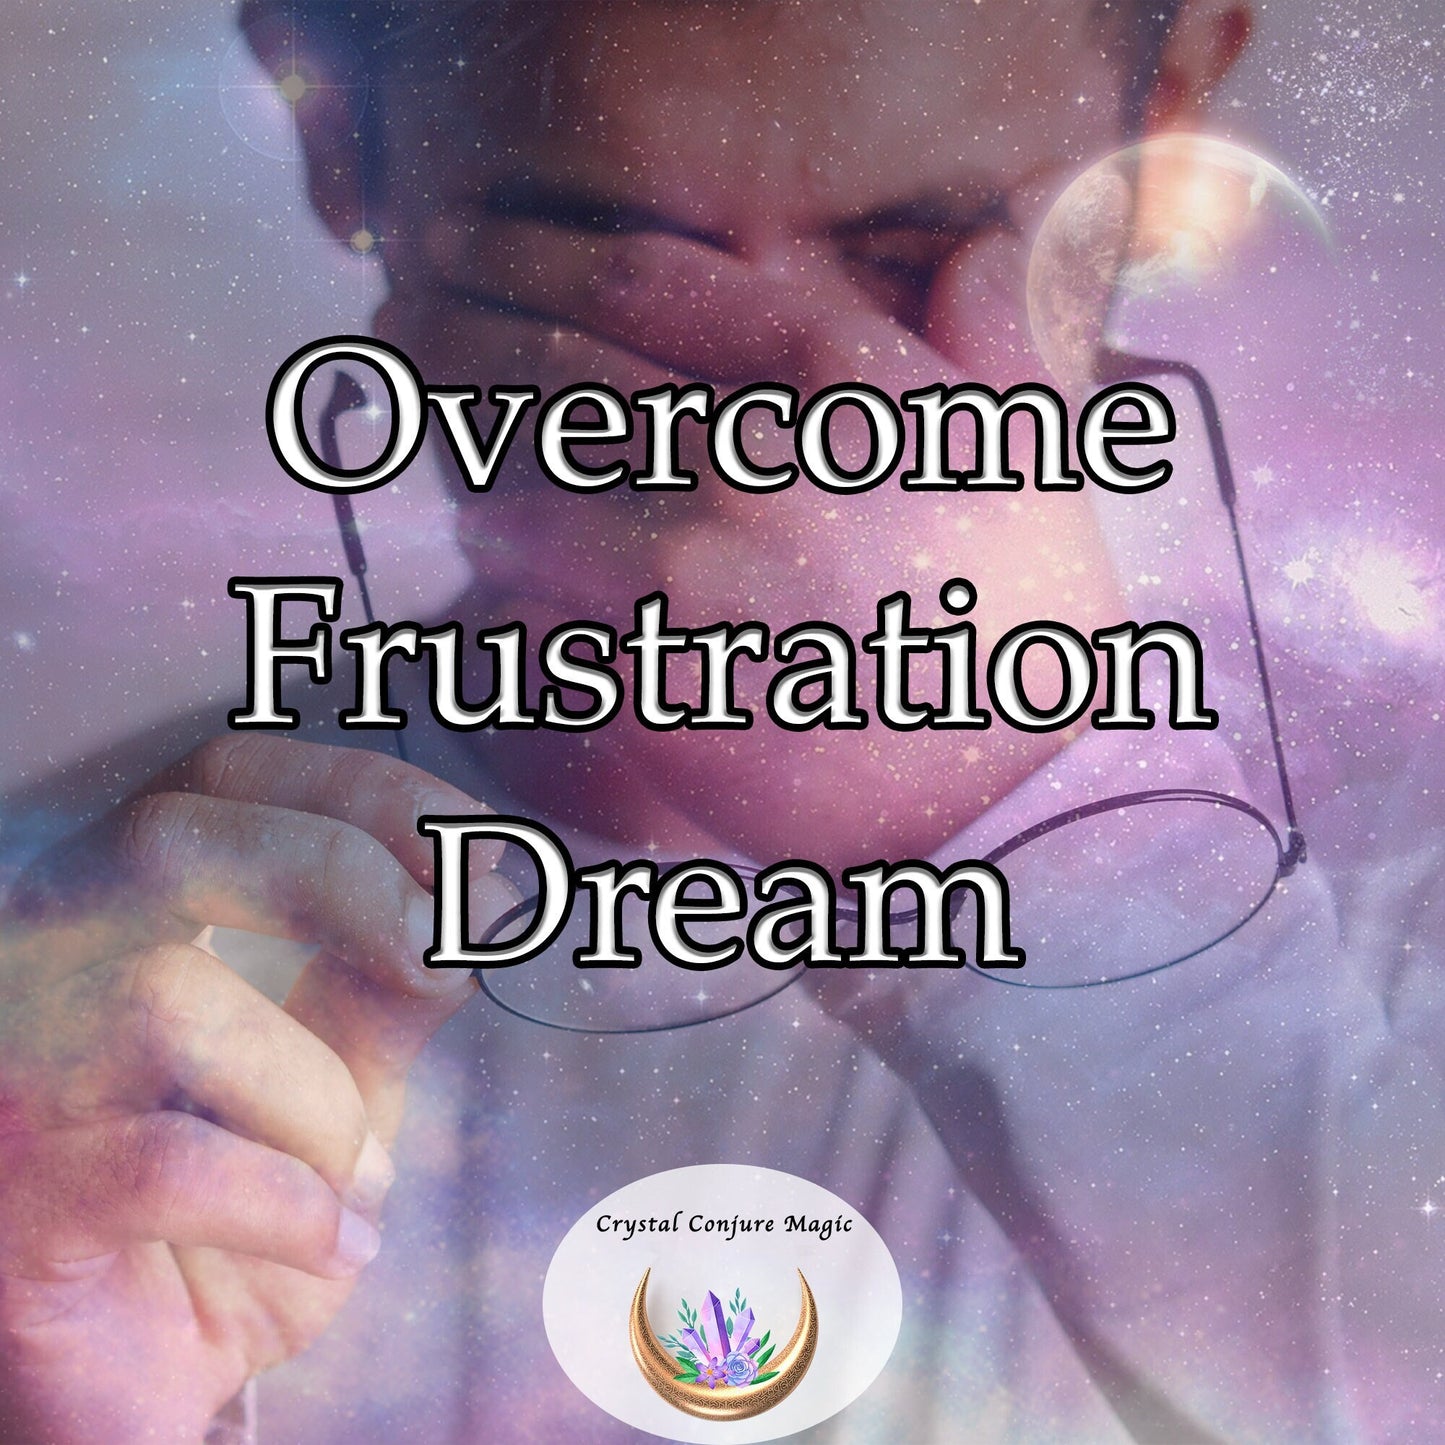 Overcome Frustration Dream -  It's time to break loose from the chains of anger and anxiety.